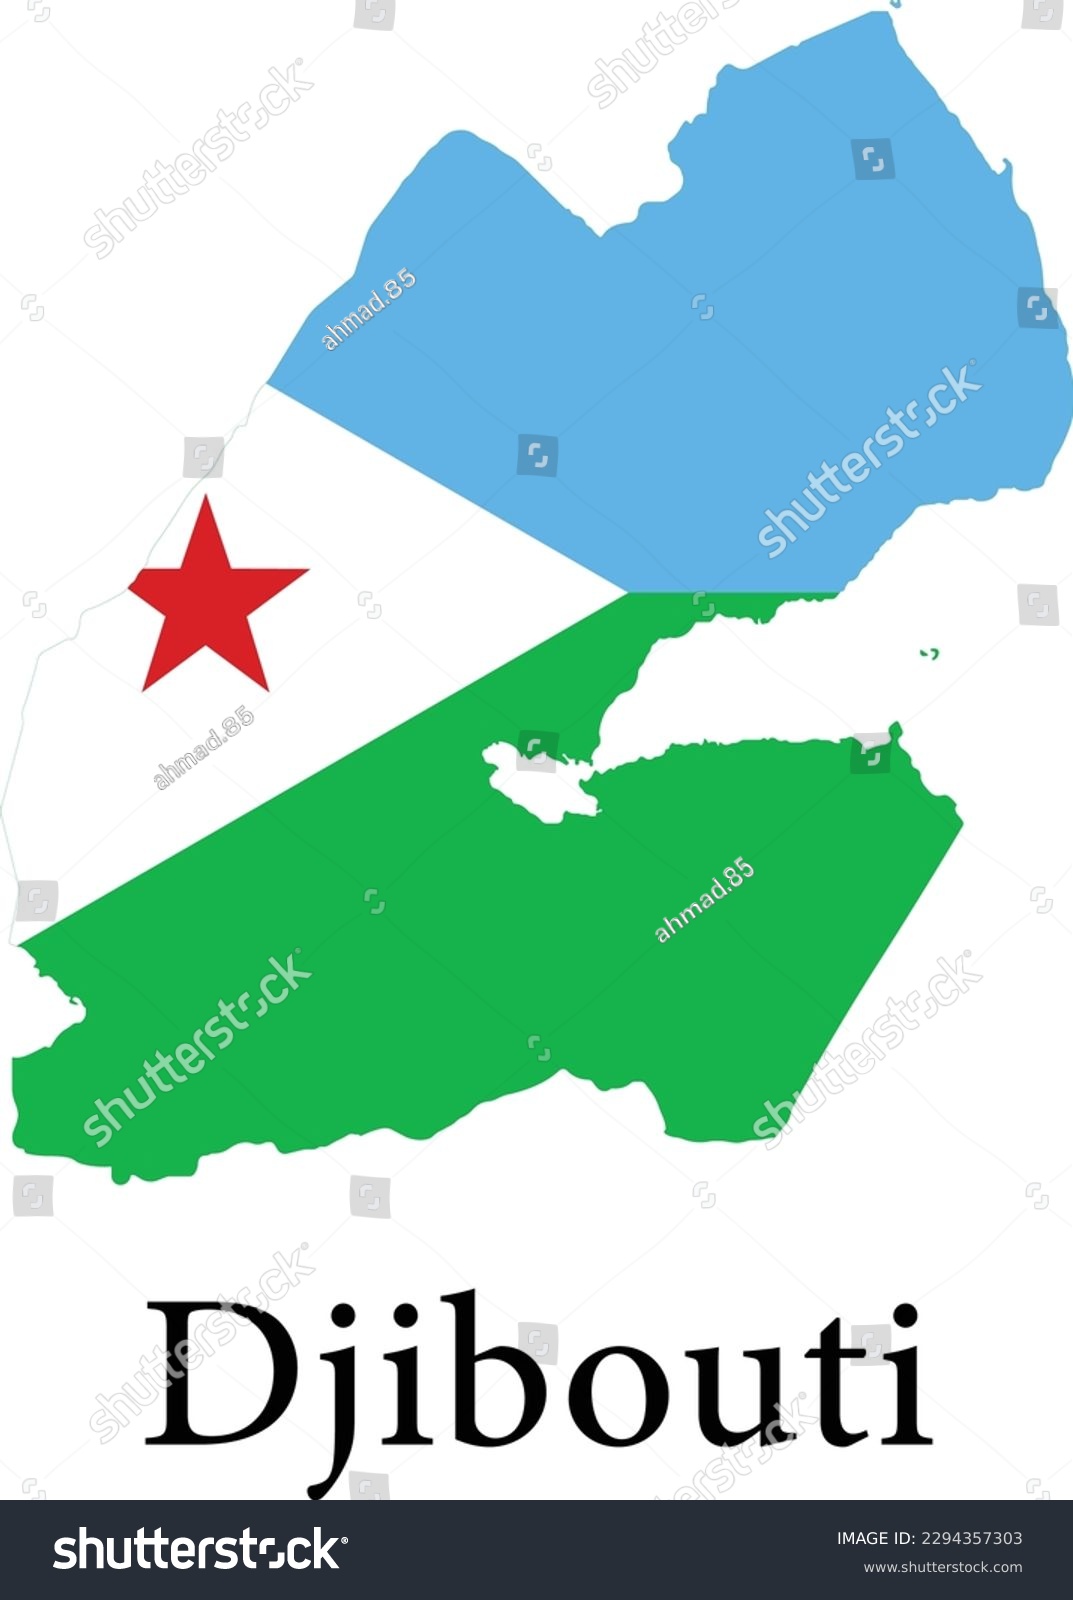 SVG of djibouti flag vector illustration, flag in shape of a djibouti map. svg